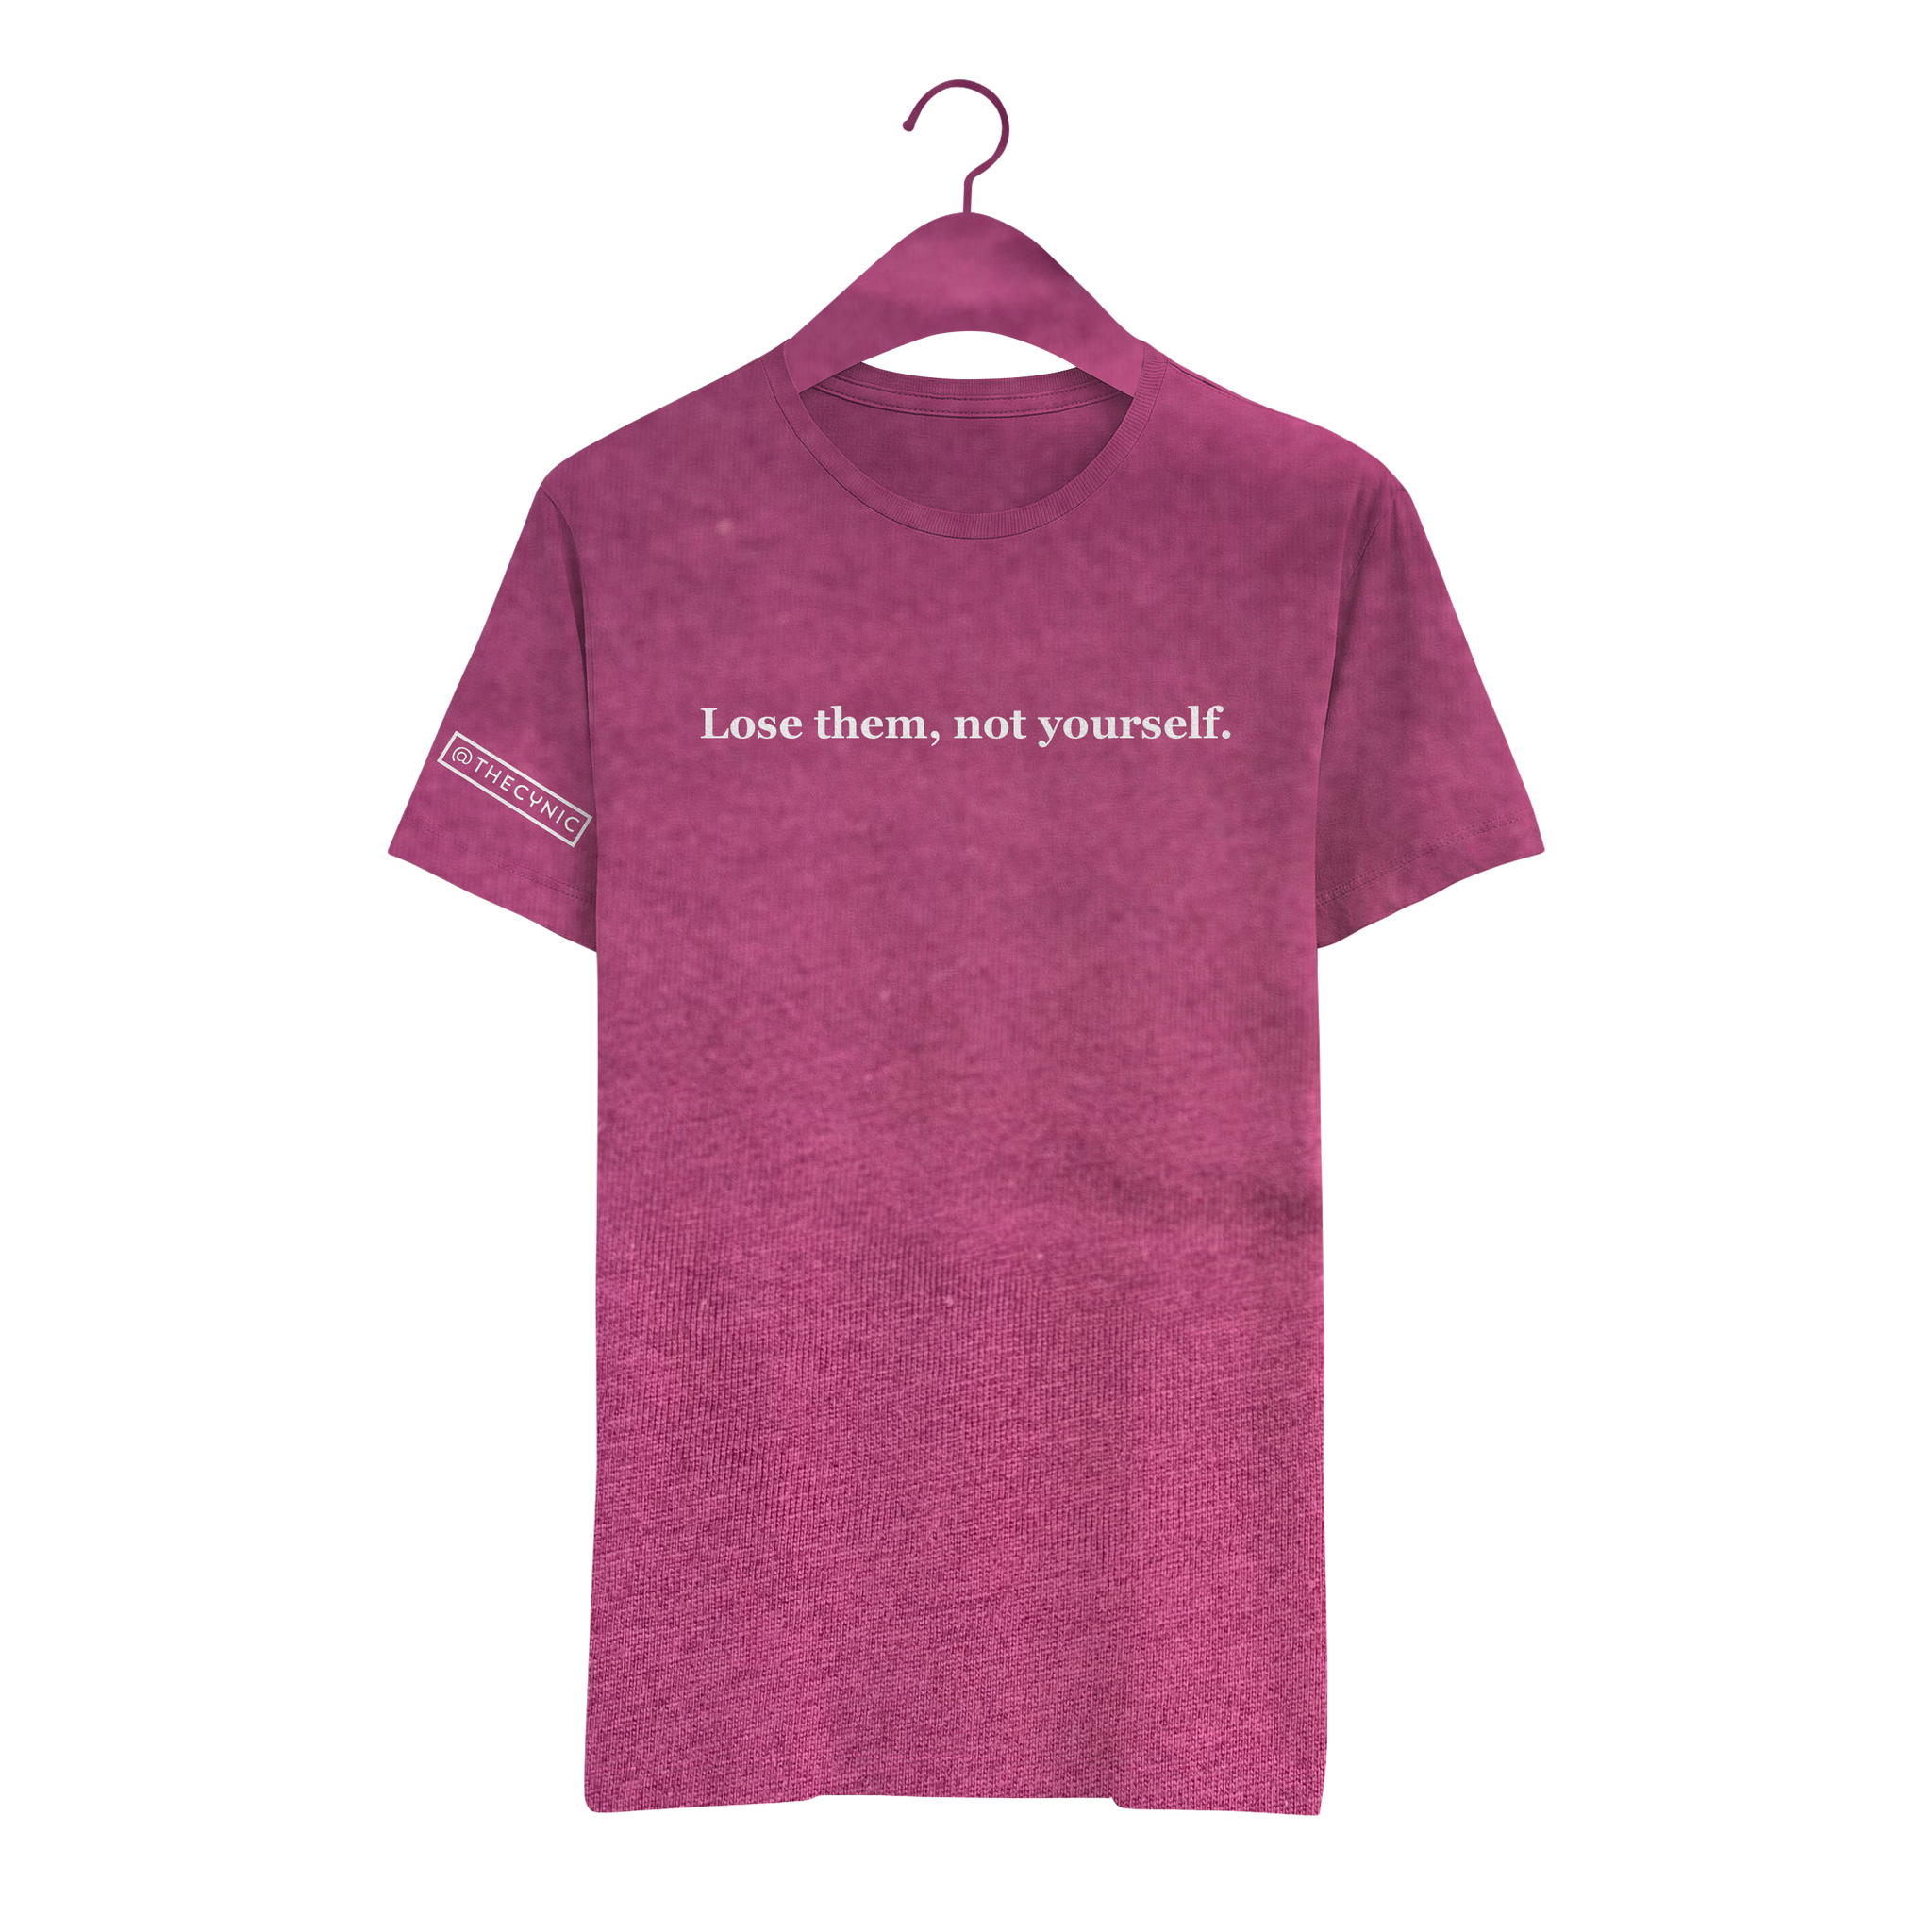 Lose them, not yourself. - Unisex Tee